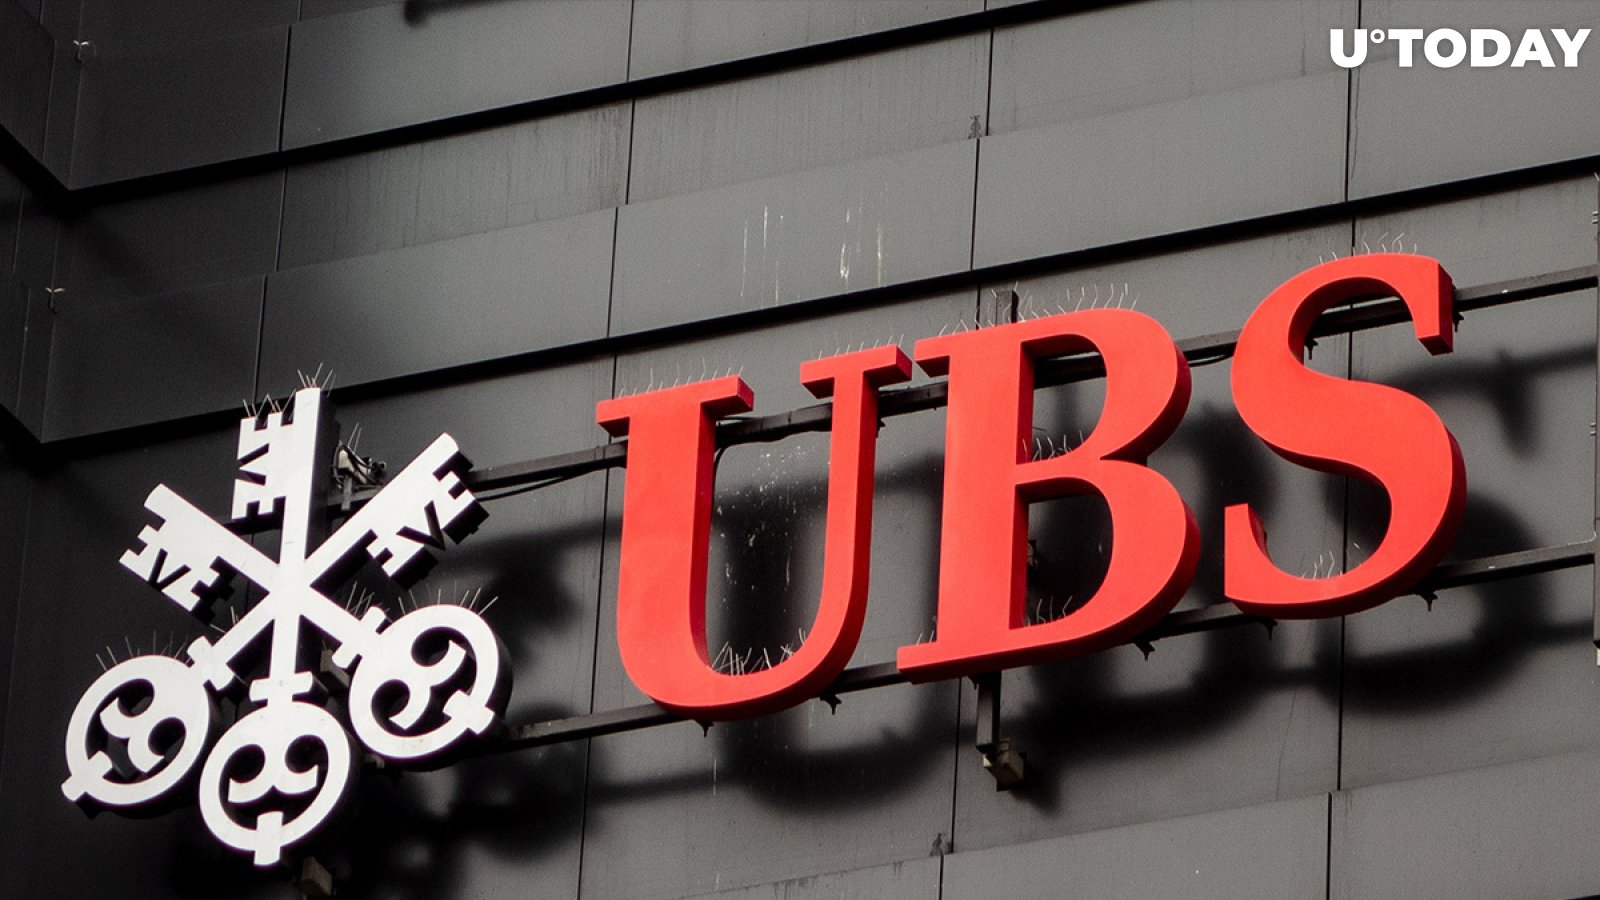 Swiss banking giant UBS jumps on the Bitcoin ETF bandwagon 